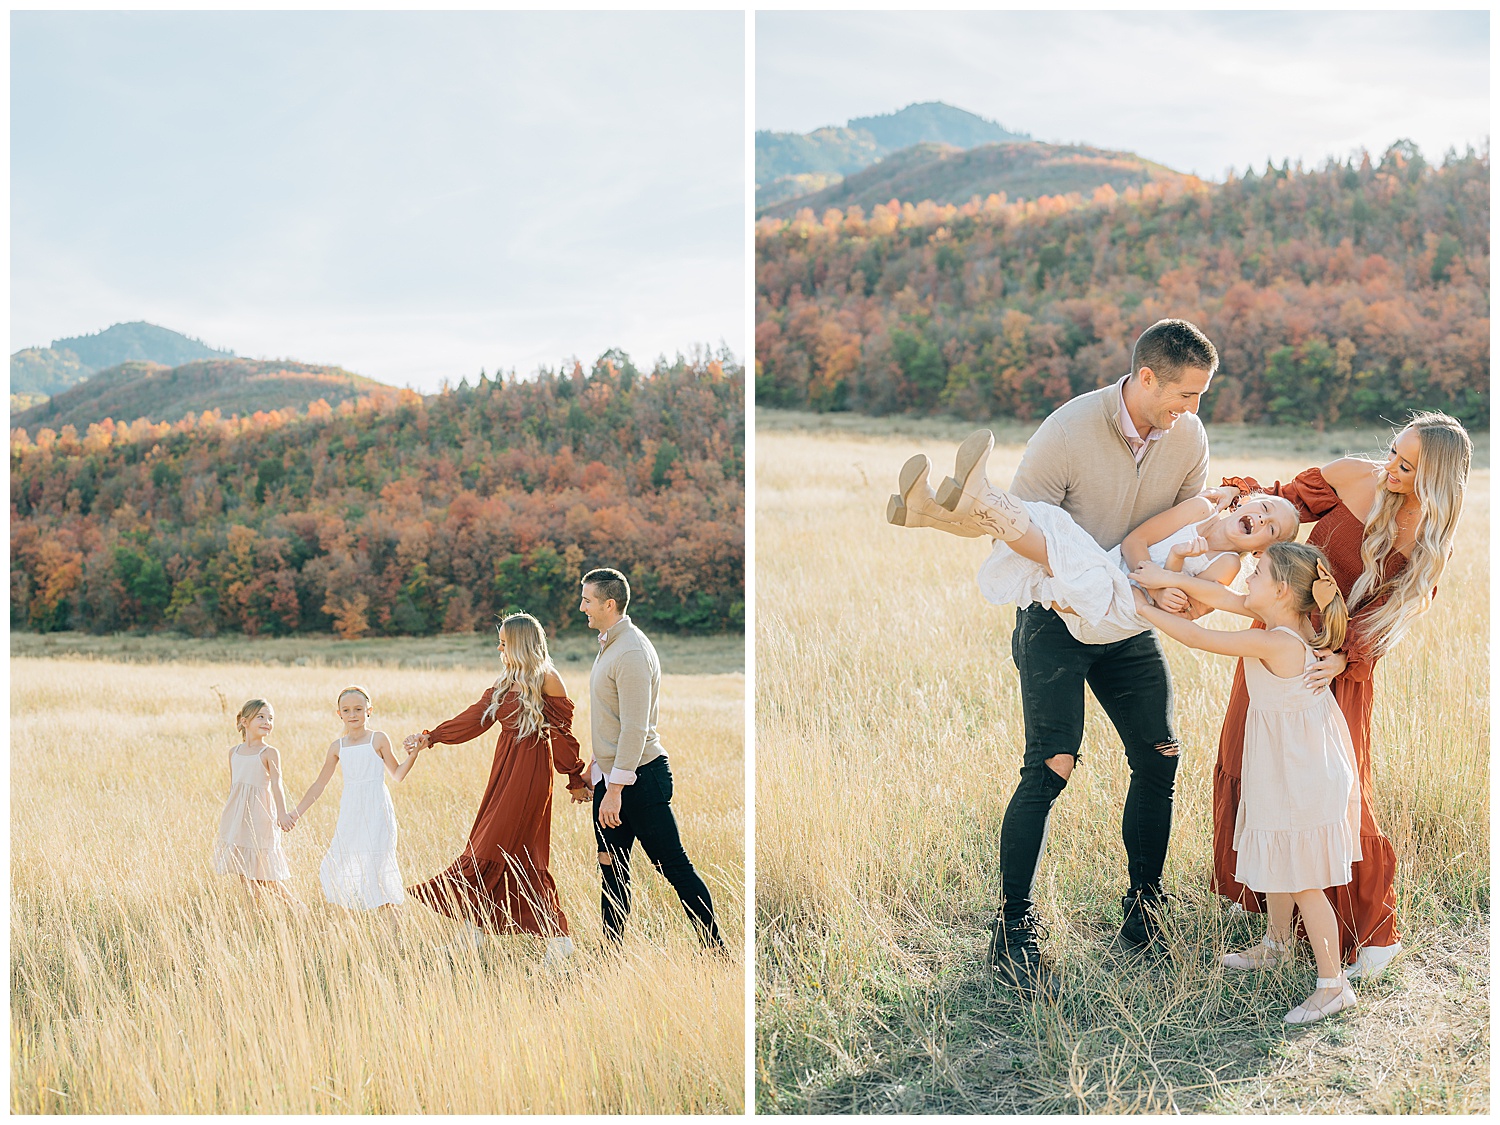 two fall family photos. One where all four family members are holding hands and walking. One where the family is holding one daughter and tickling her. 